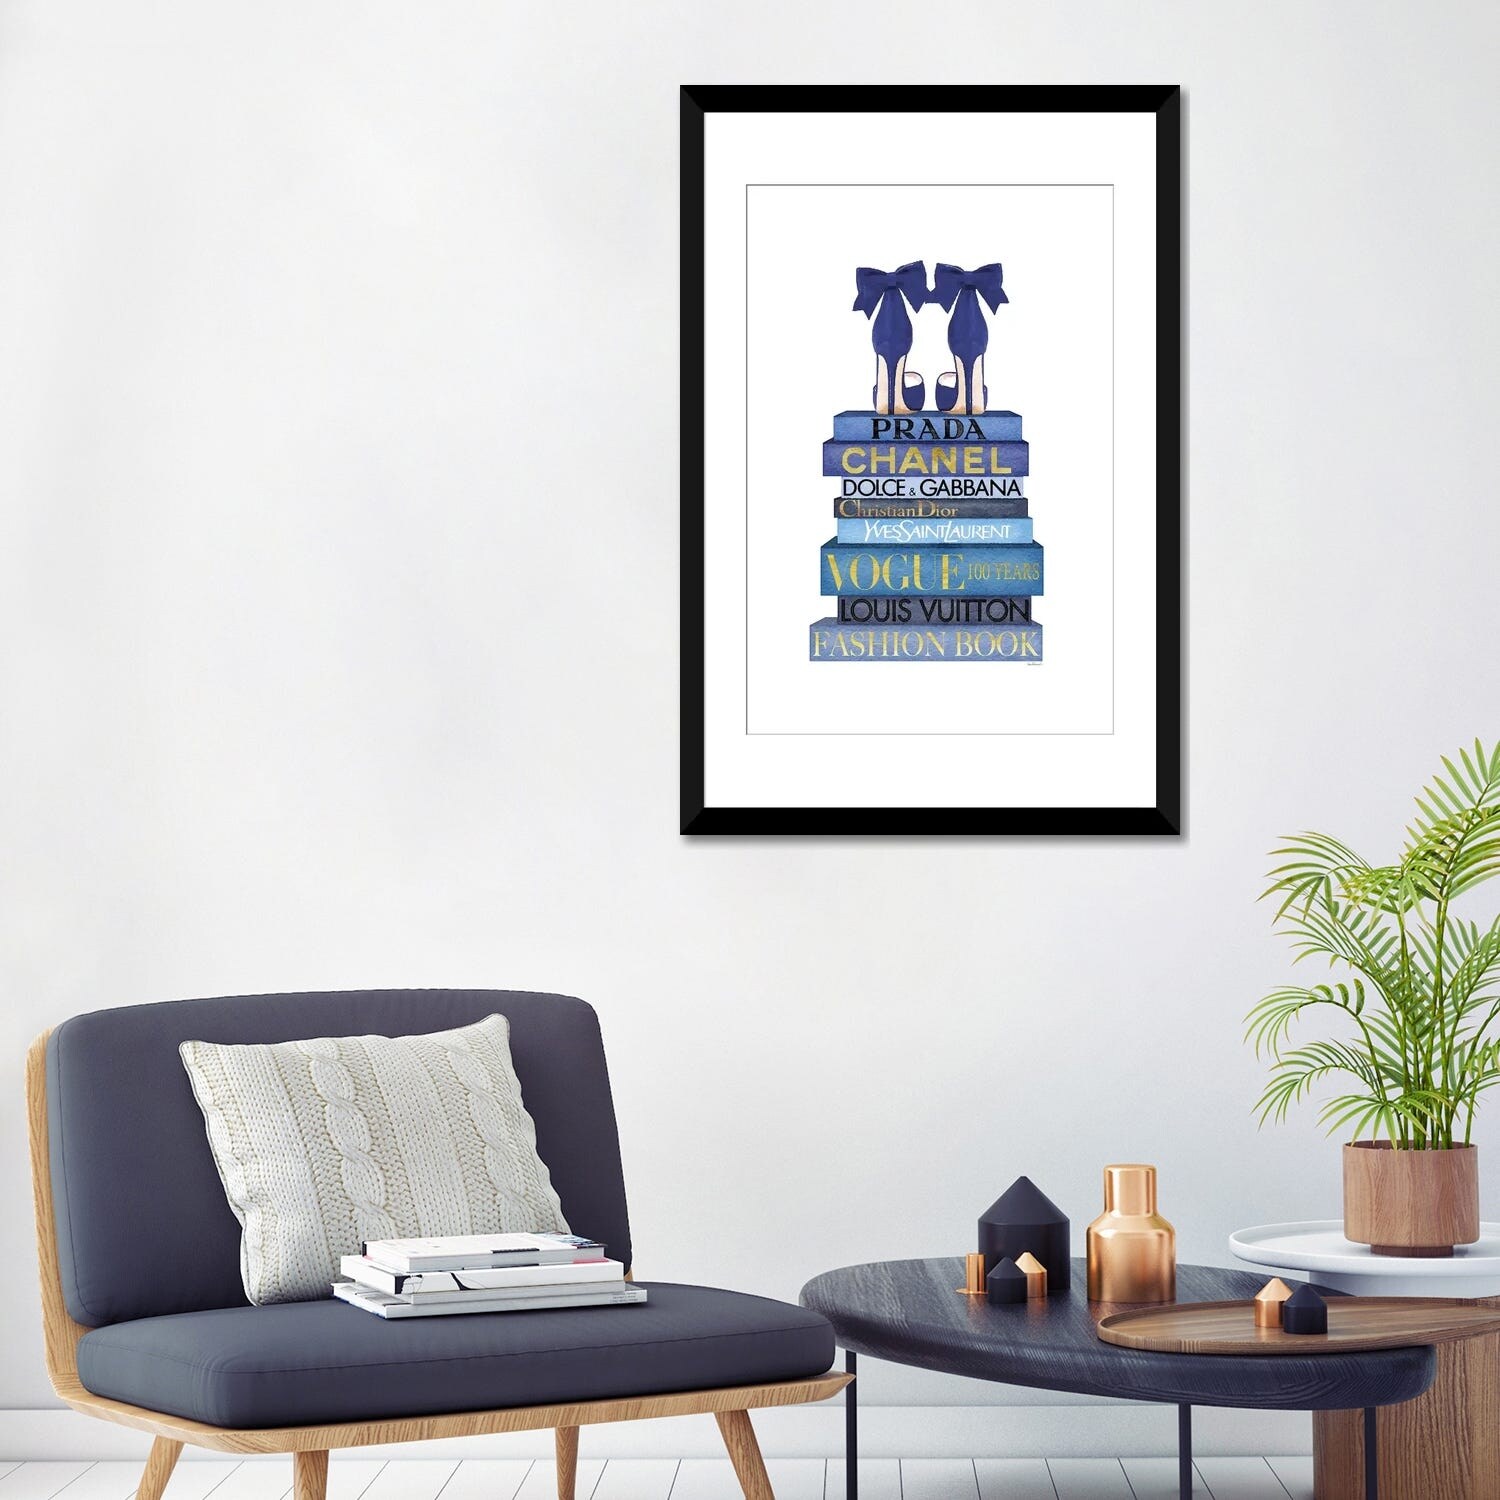 Framed Canvas Art (Champagne) - Tall Blue Books, Black Shoes by Amanda Greenwood ( Fashion > Vogue art) - 26x18 in